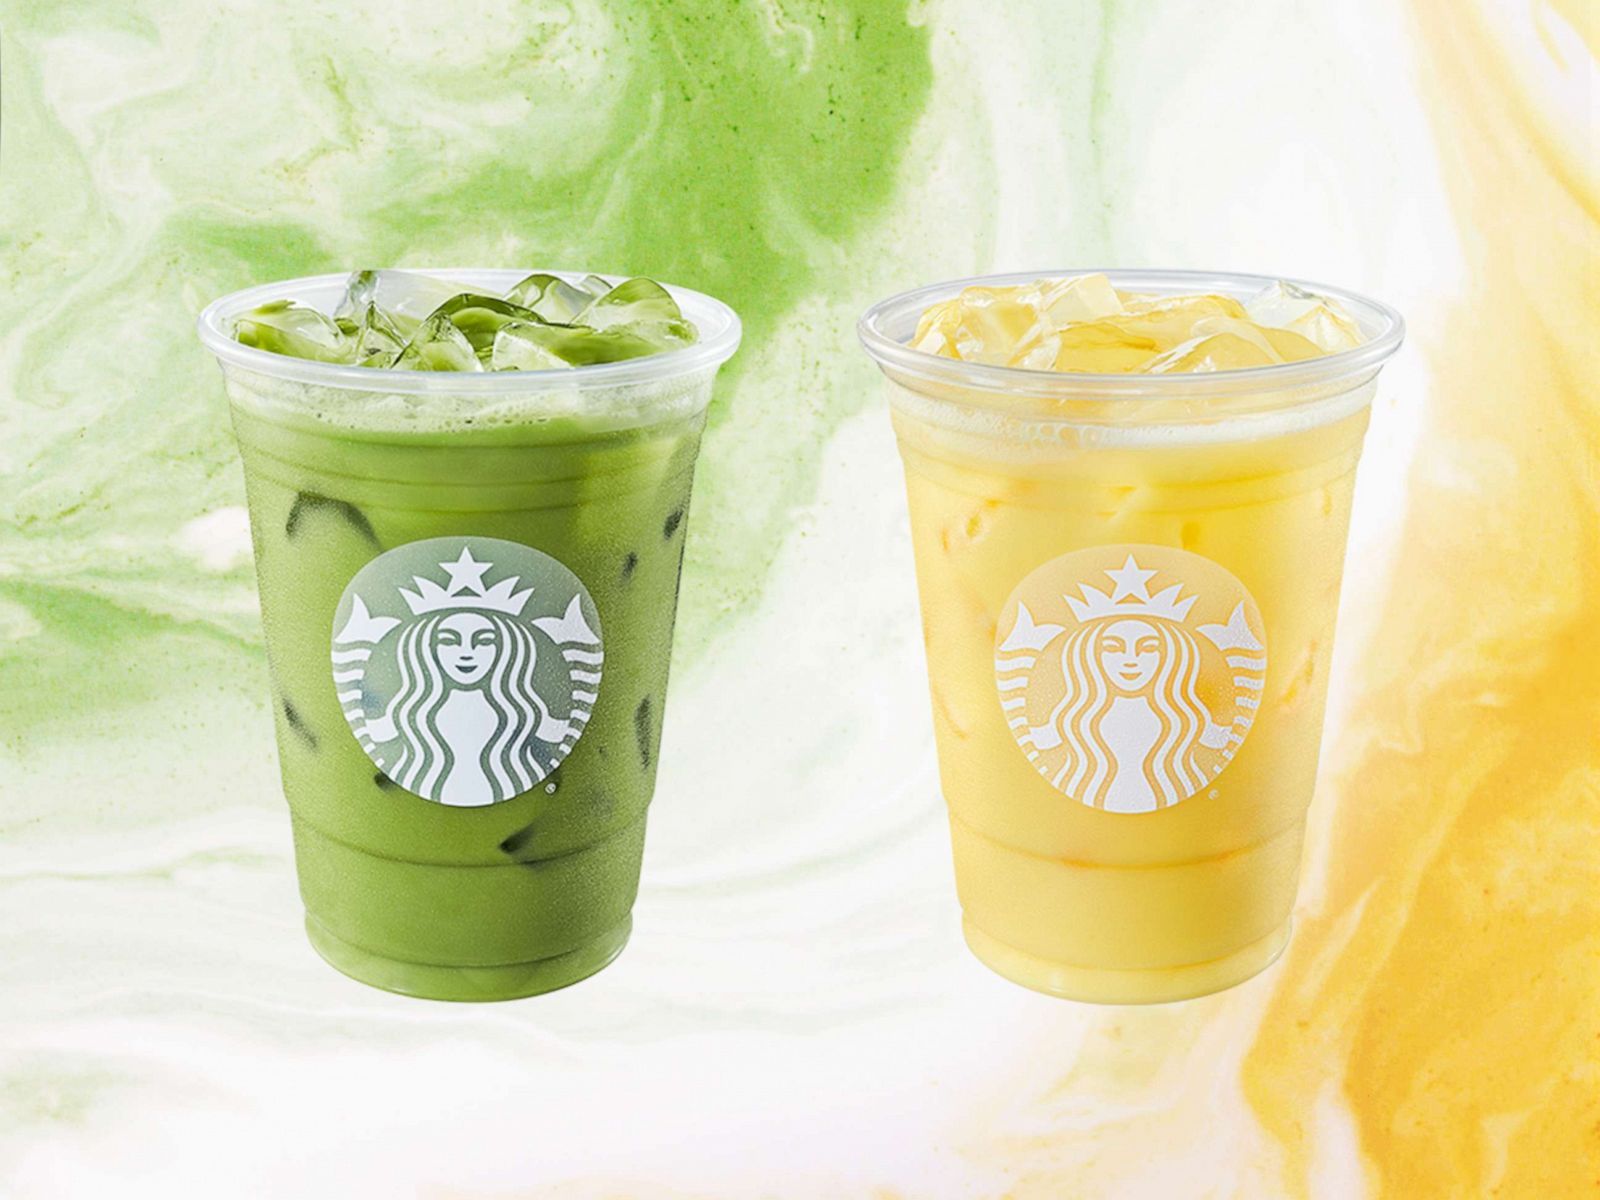 New spring menu at Starbucks includes iced pineapple coconut milk matcha